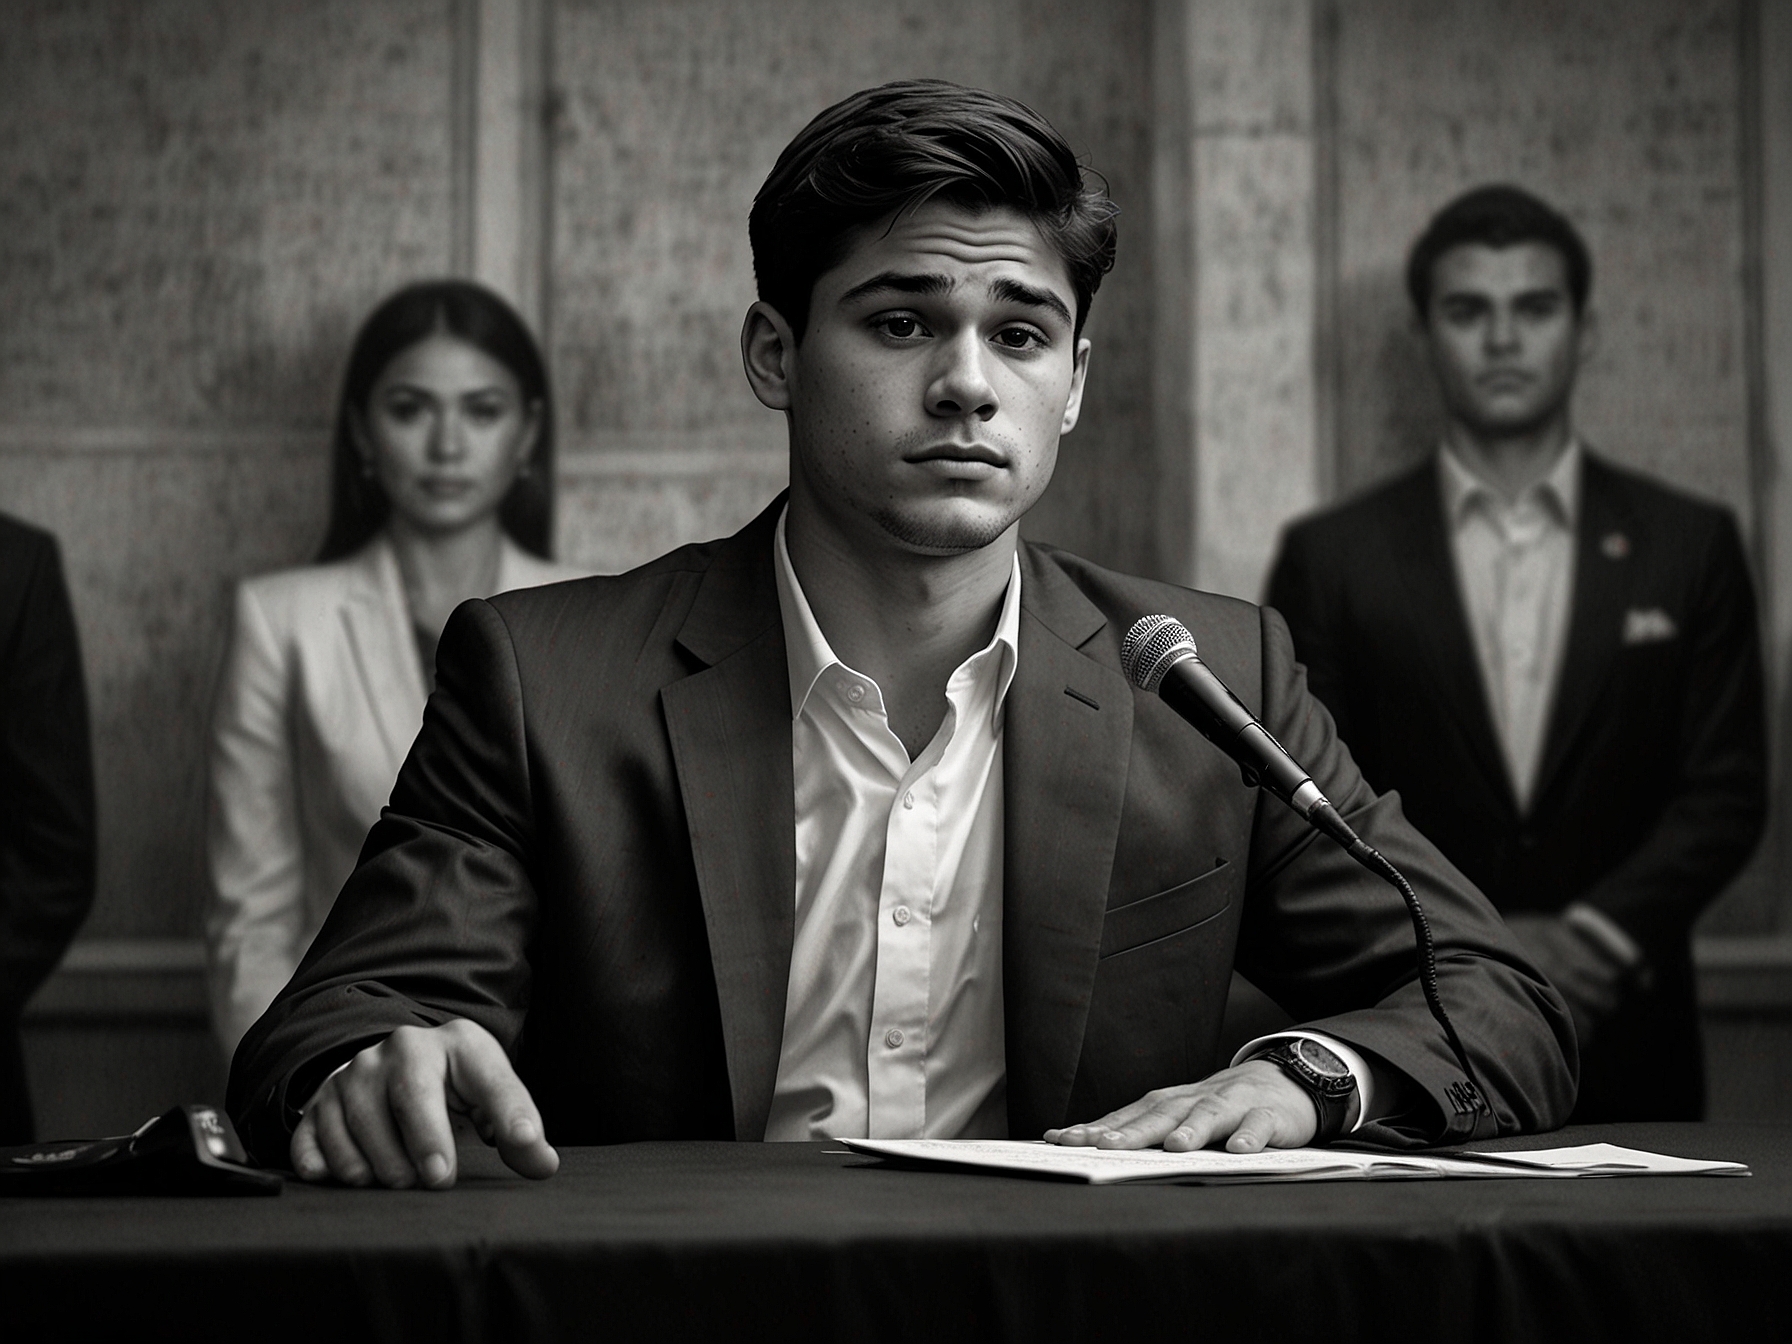 A portrait of Ryan Garcia expressing remorse at a press conference, addressing the doping accusations and his commitment to cooperate with ongoing investigations.